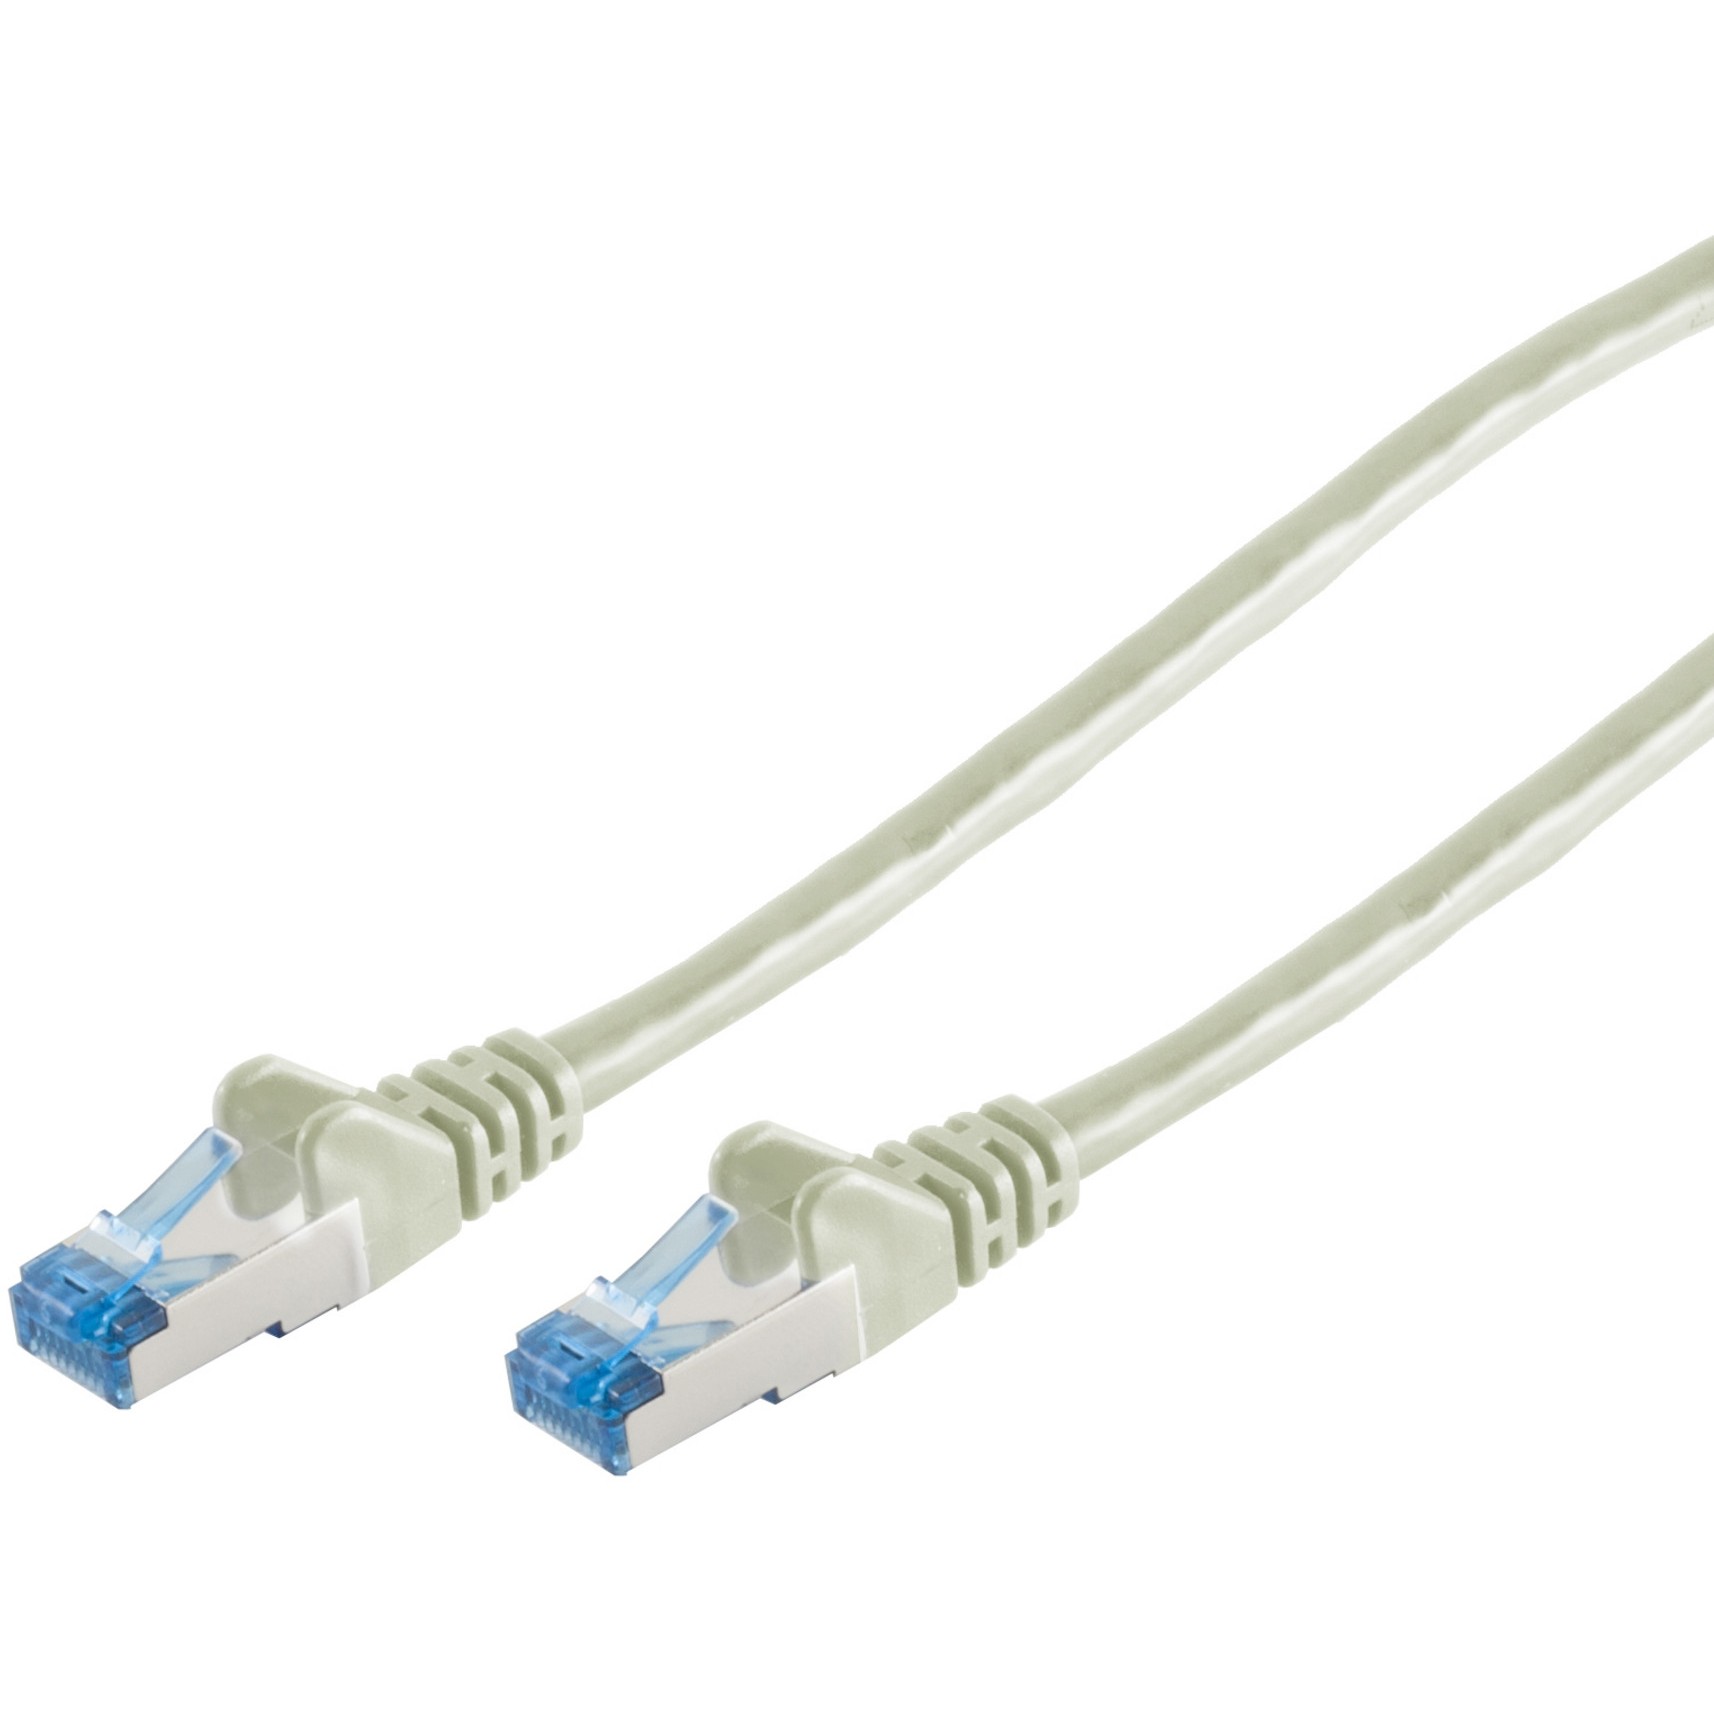 S-Conn 75720 networking cable - 75720